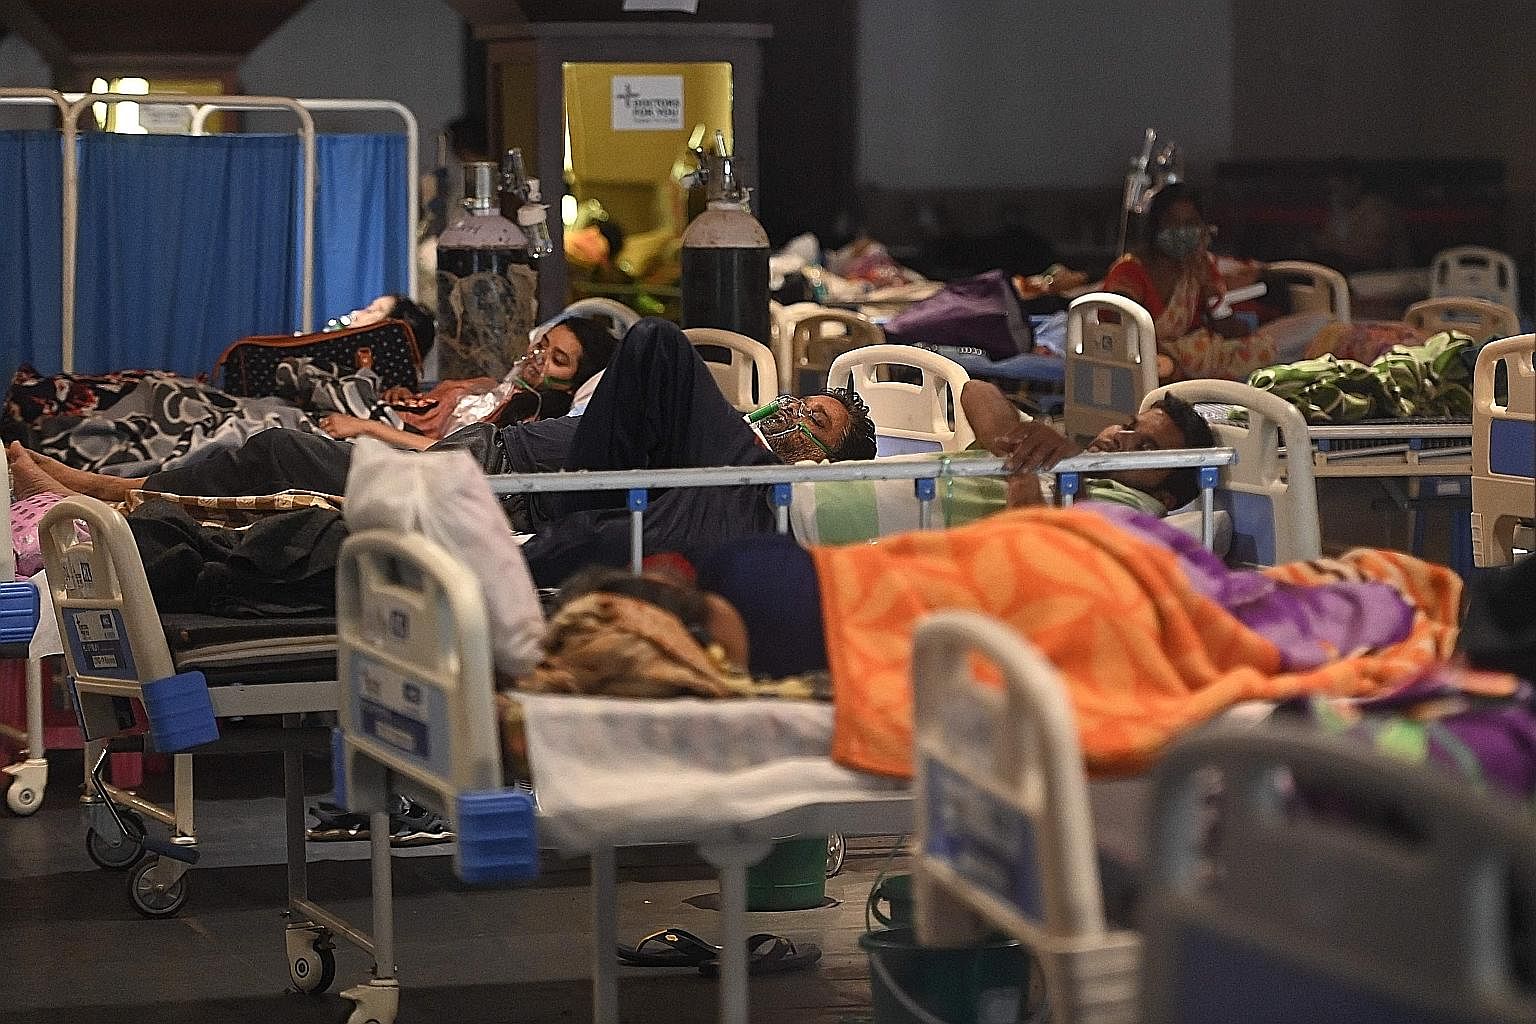 A banquet hall in New Delhi was converted into a Covid-19 treatment facility to help cope with the shortage of hospital beds as India battled a deadly surge in cases yesterday. Amid reports of patients frantically trying to get oxygen cylinders, coun